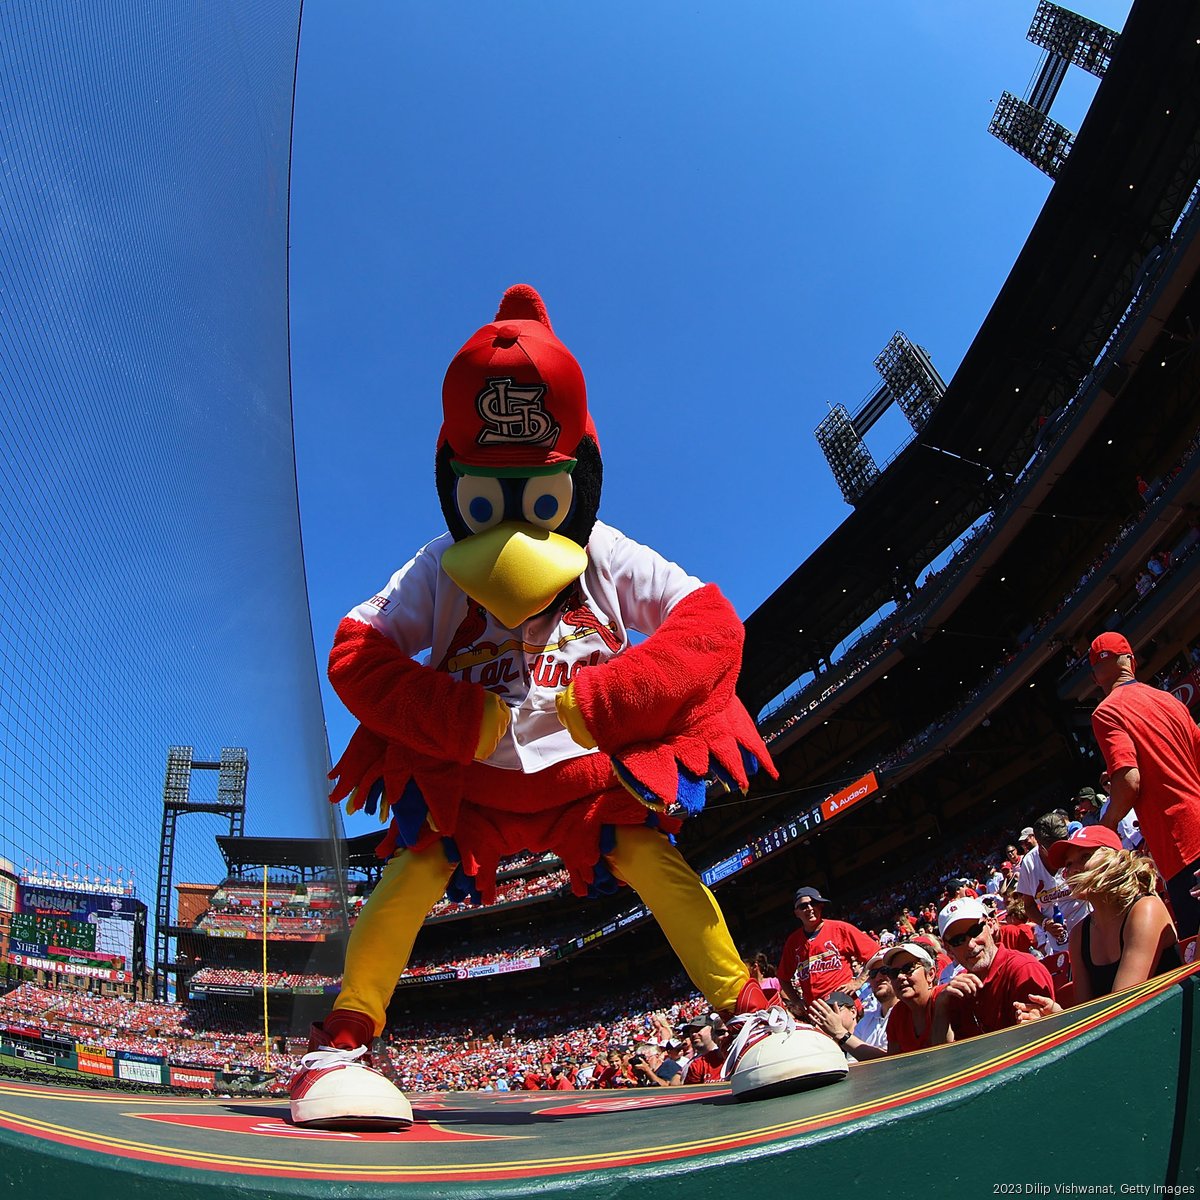 St. Louis Cardinals TV ratings down, attendance up as team reaches